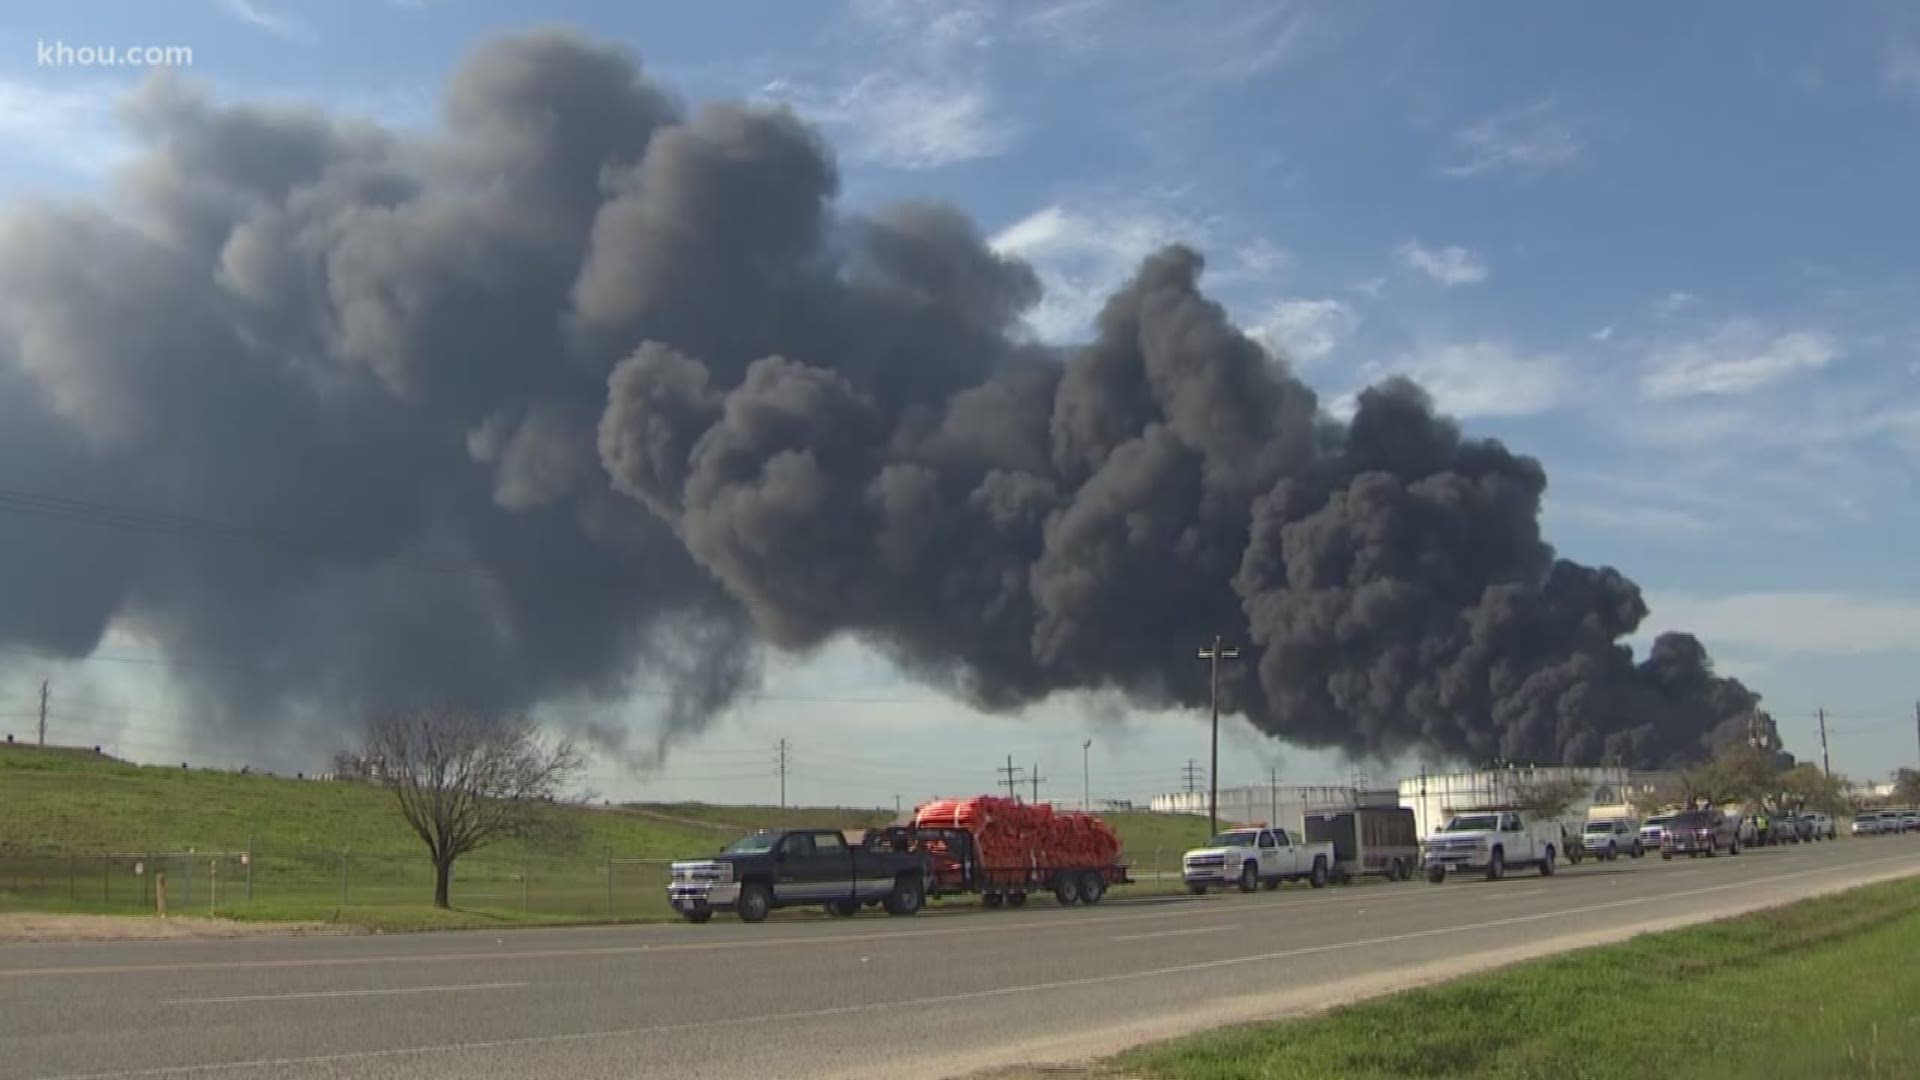 Houston area residents are concerned about the air quality and possible negative effects of the smoke plume moving across the city after a chemical fire broke out in Deer Park.